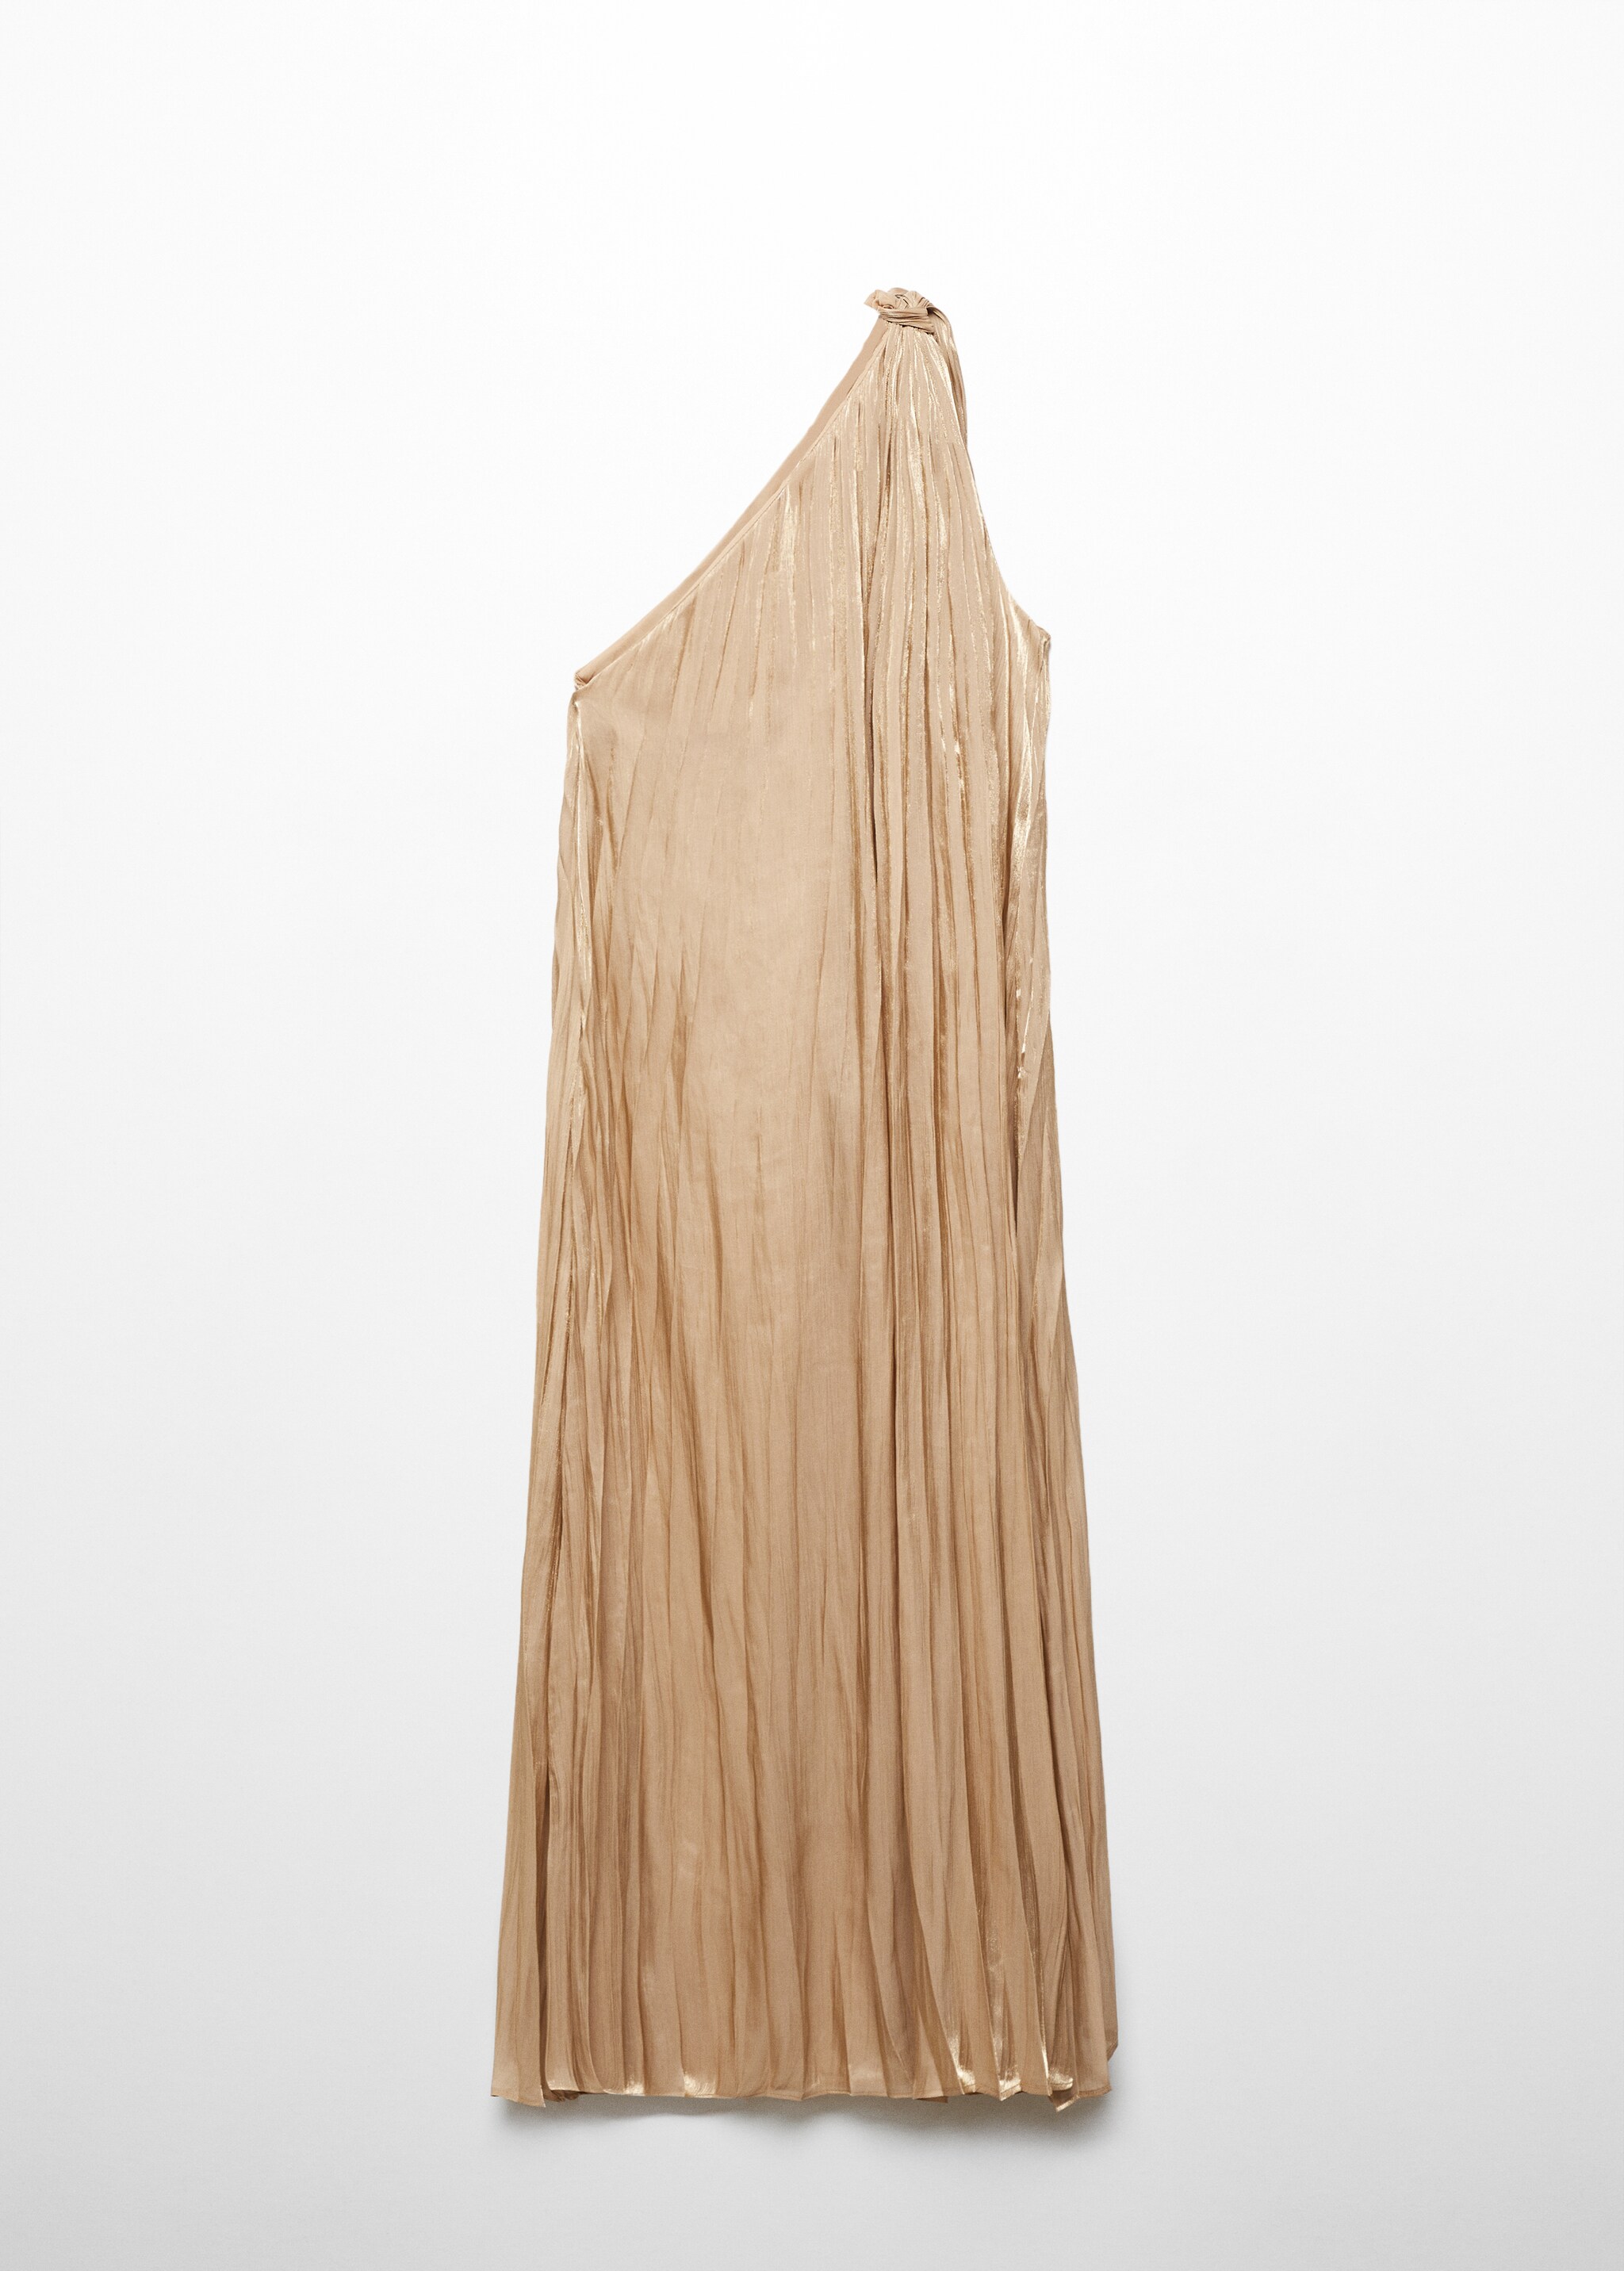 Asymmetrical pleated dress - Article without model